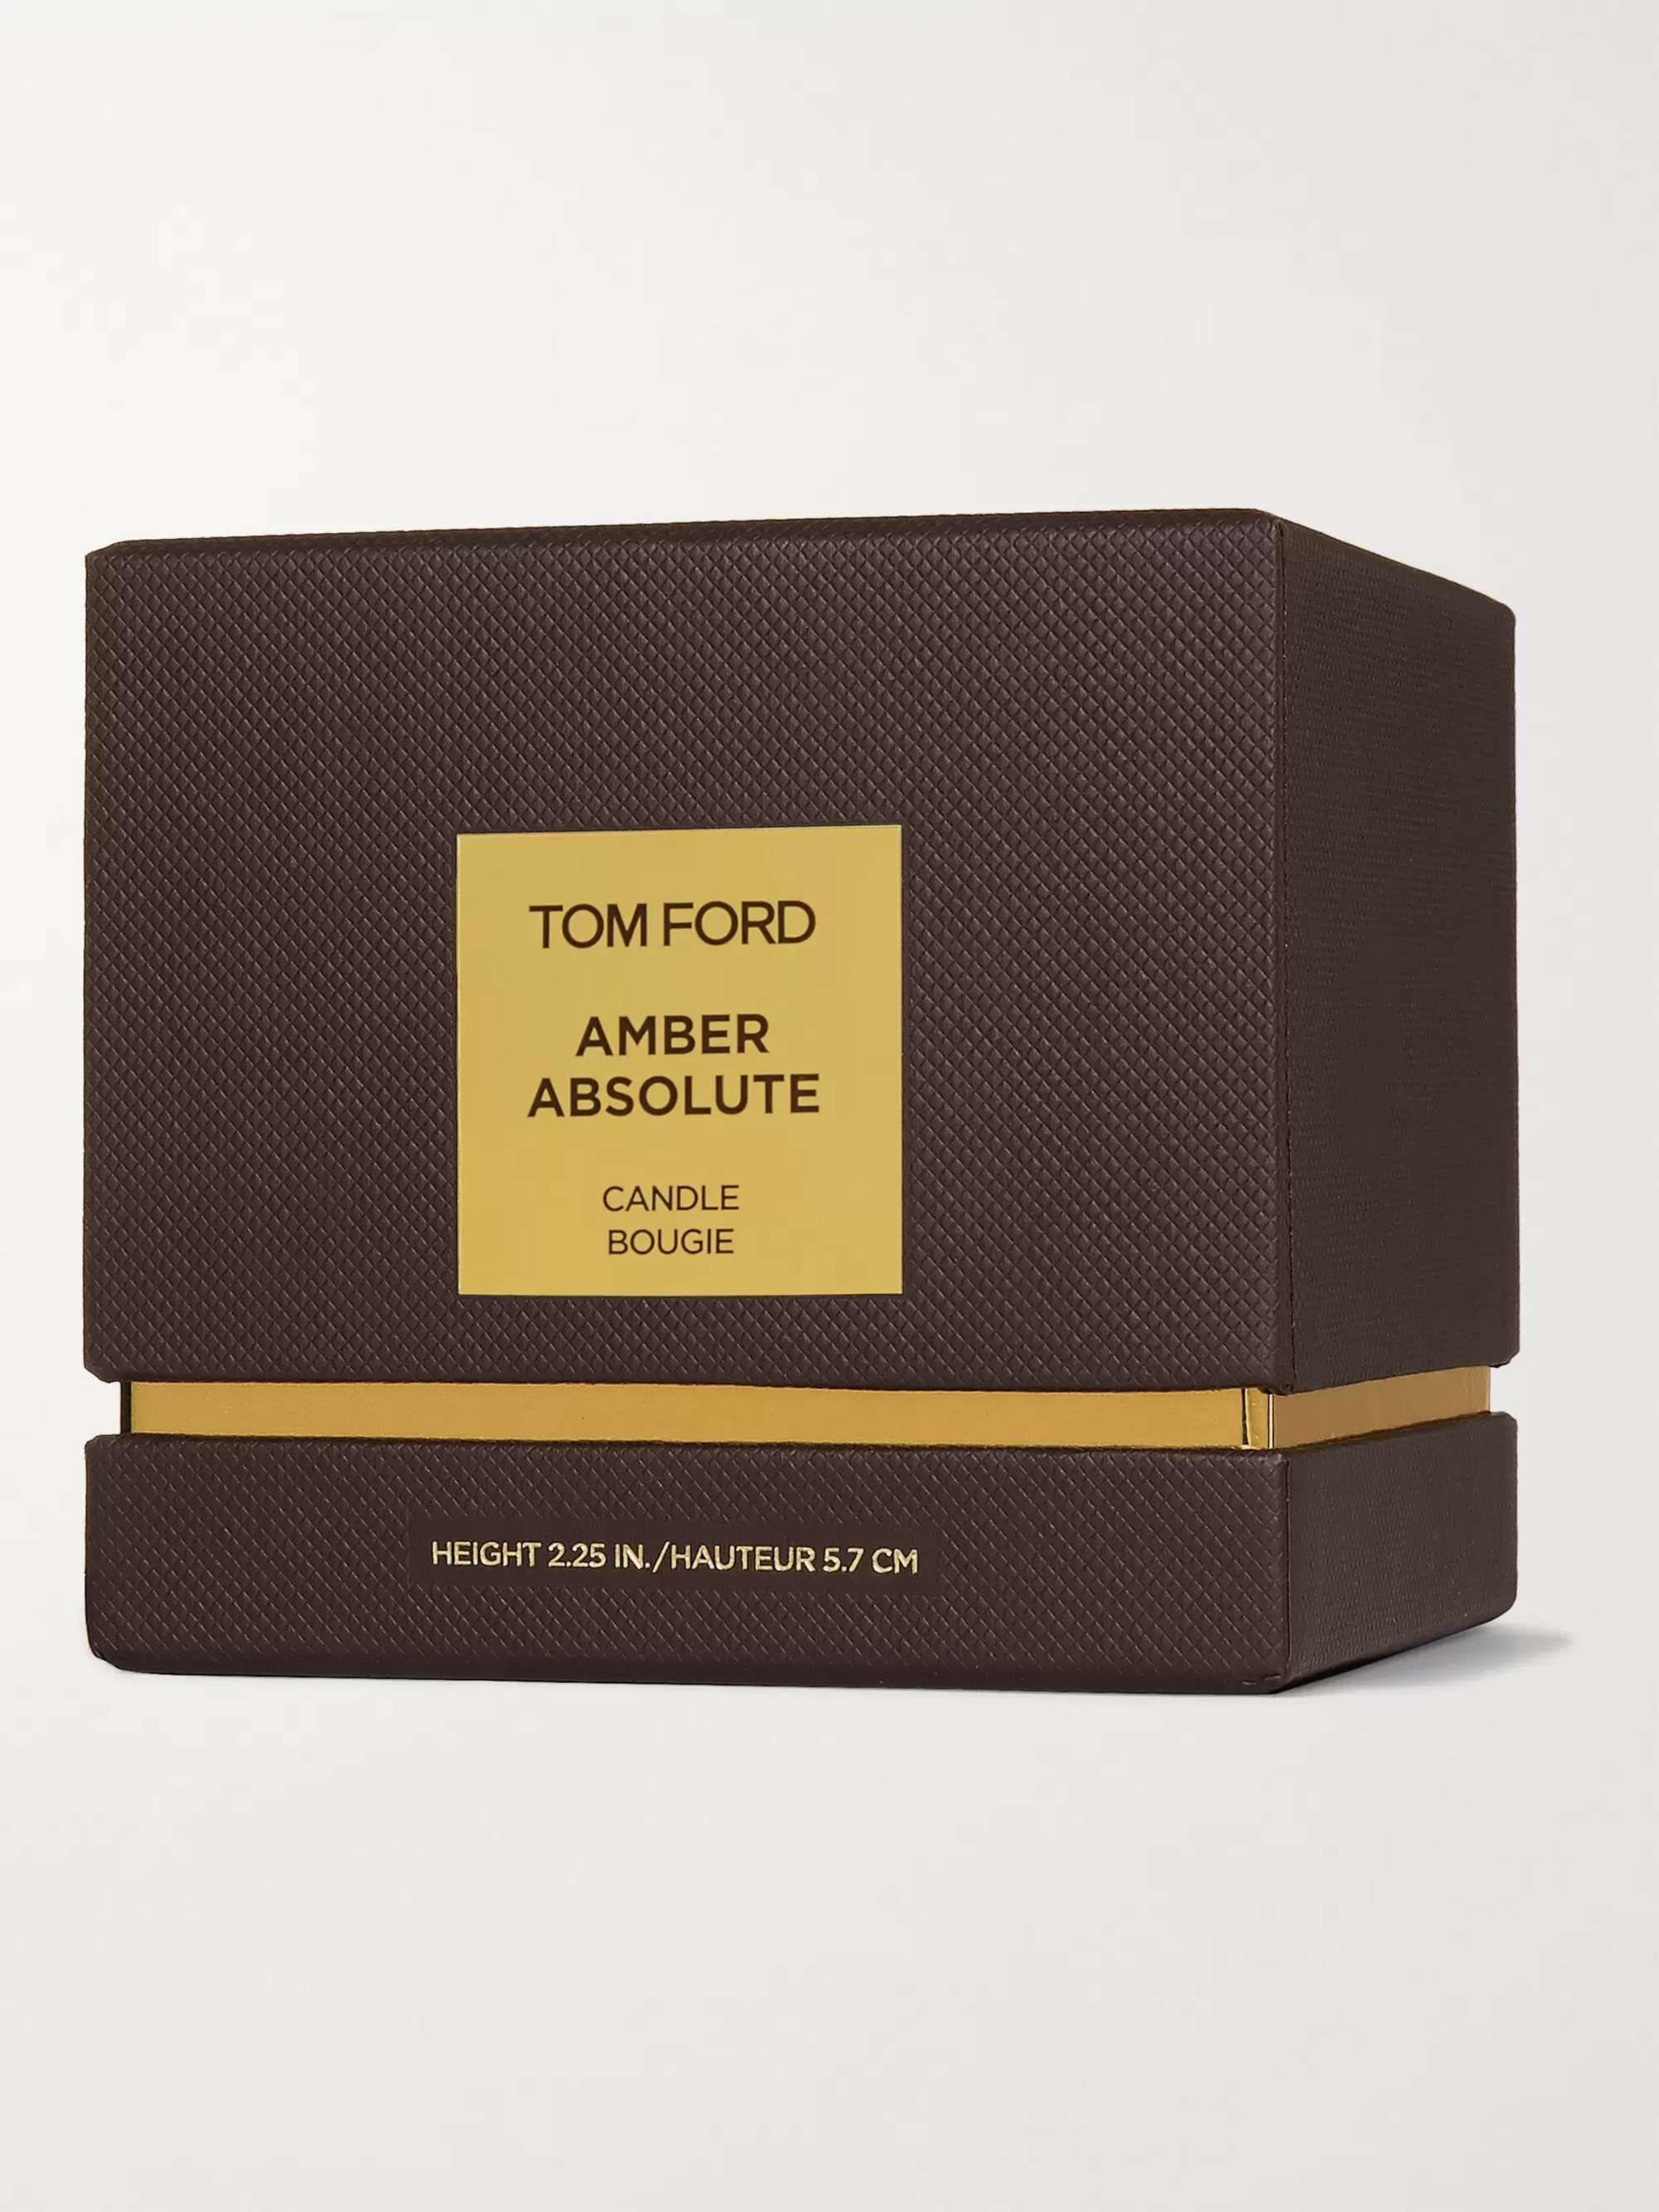 TOM FORD BEAUTY Amber Absolute Scented Candle, 200g